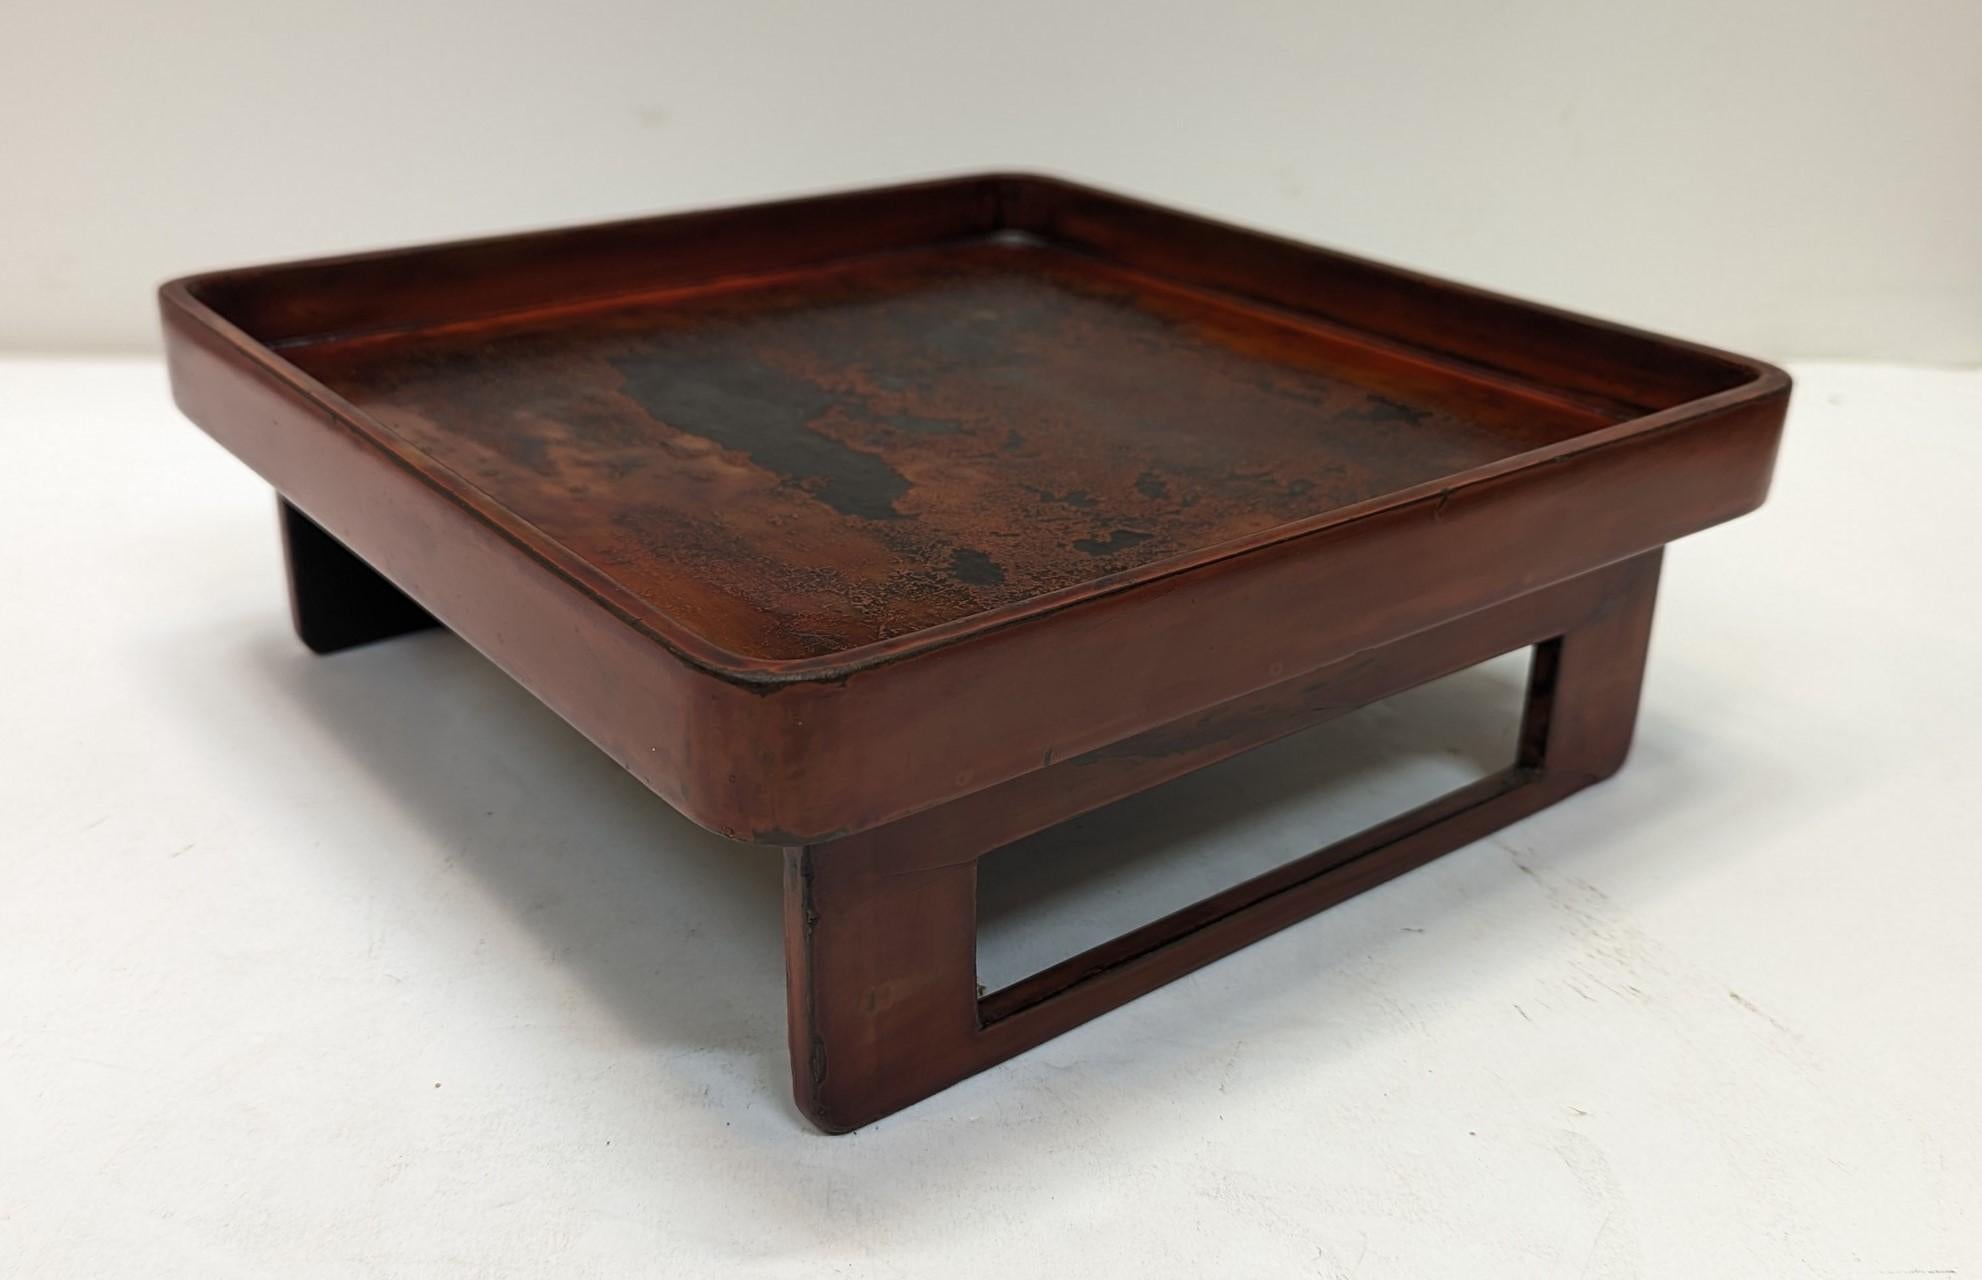 Wood Antique Lacquer Tray For Sale